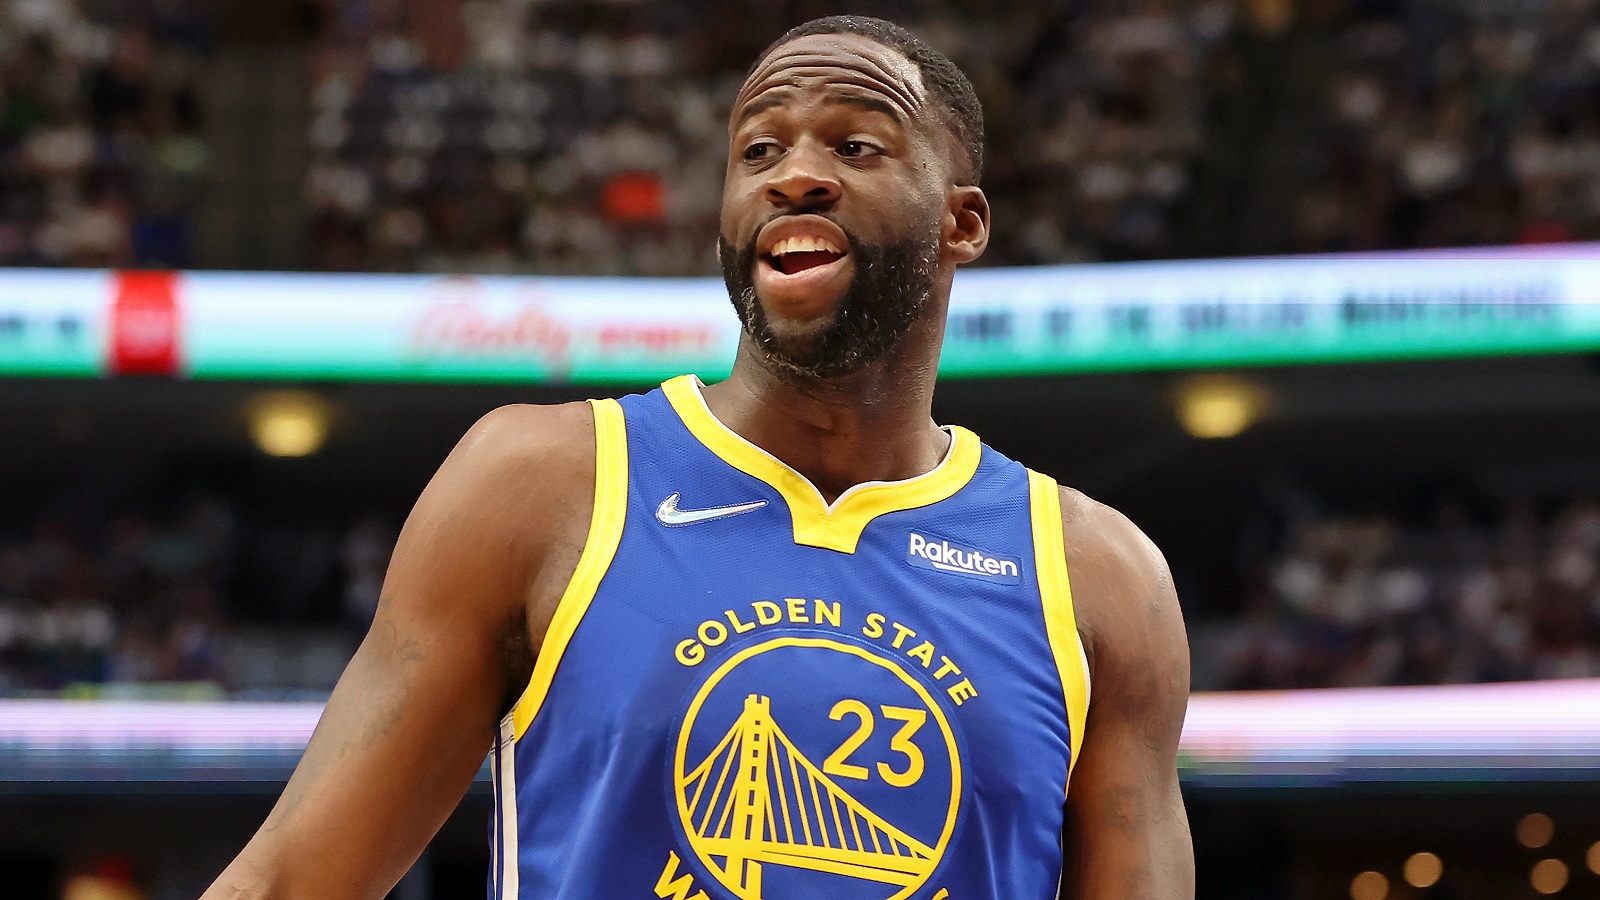 Golden State Warriors' Title Hopes Fade Without Draymond Green's Underrated Playmaking